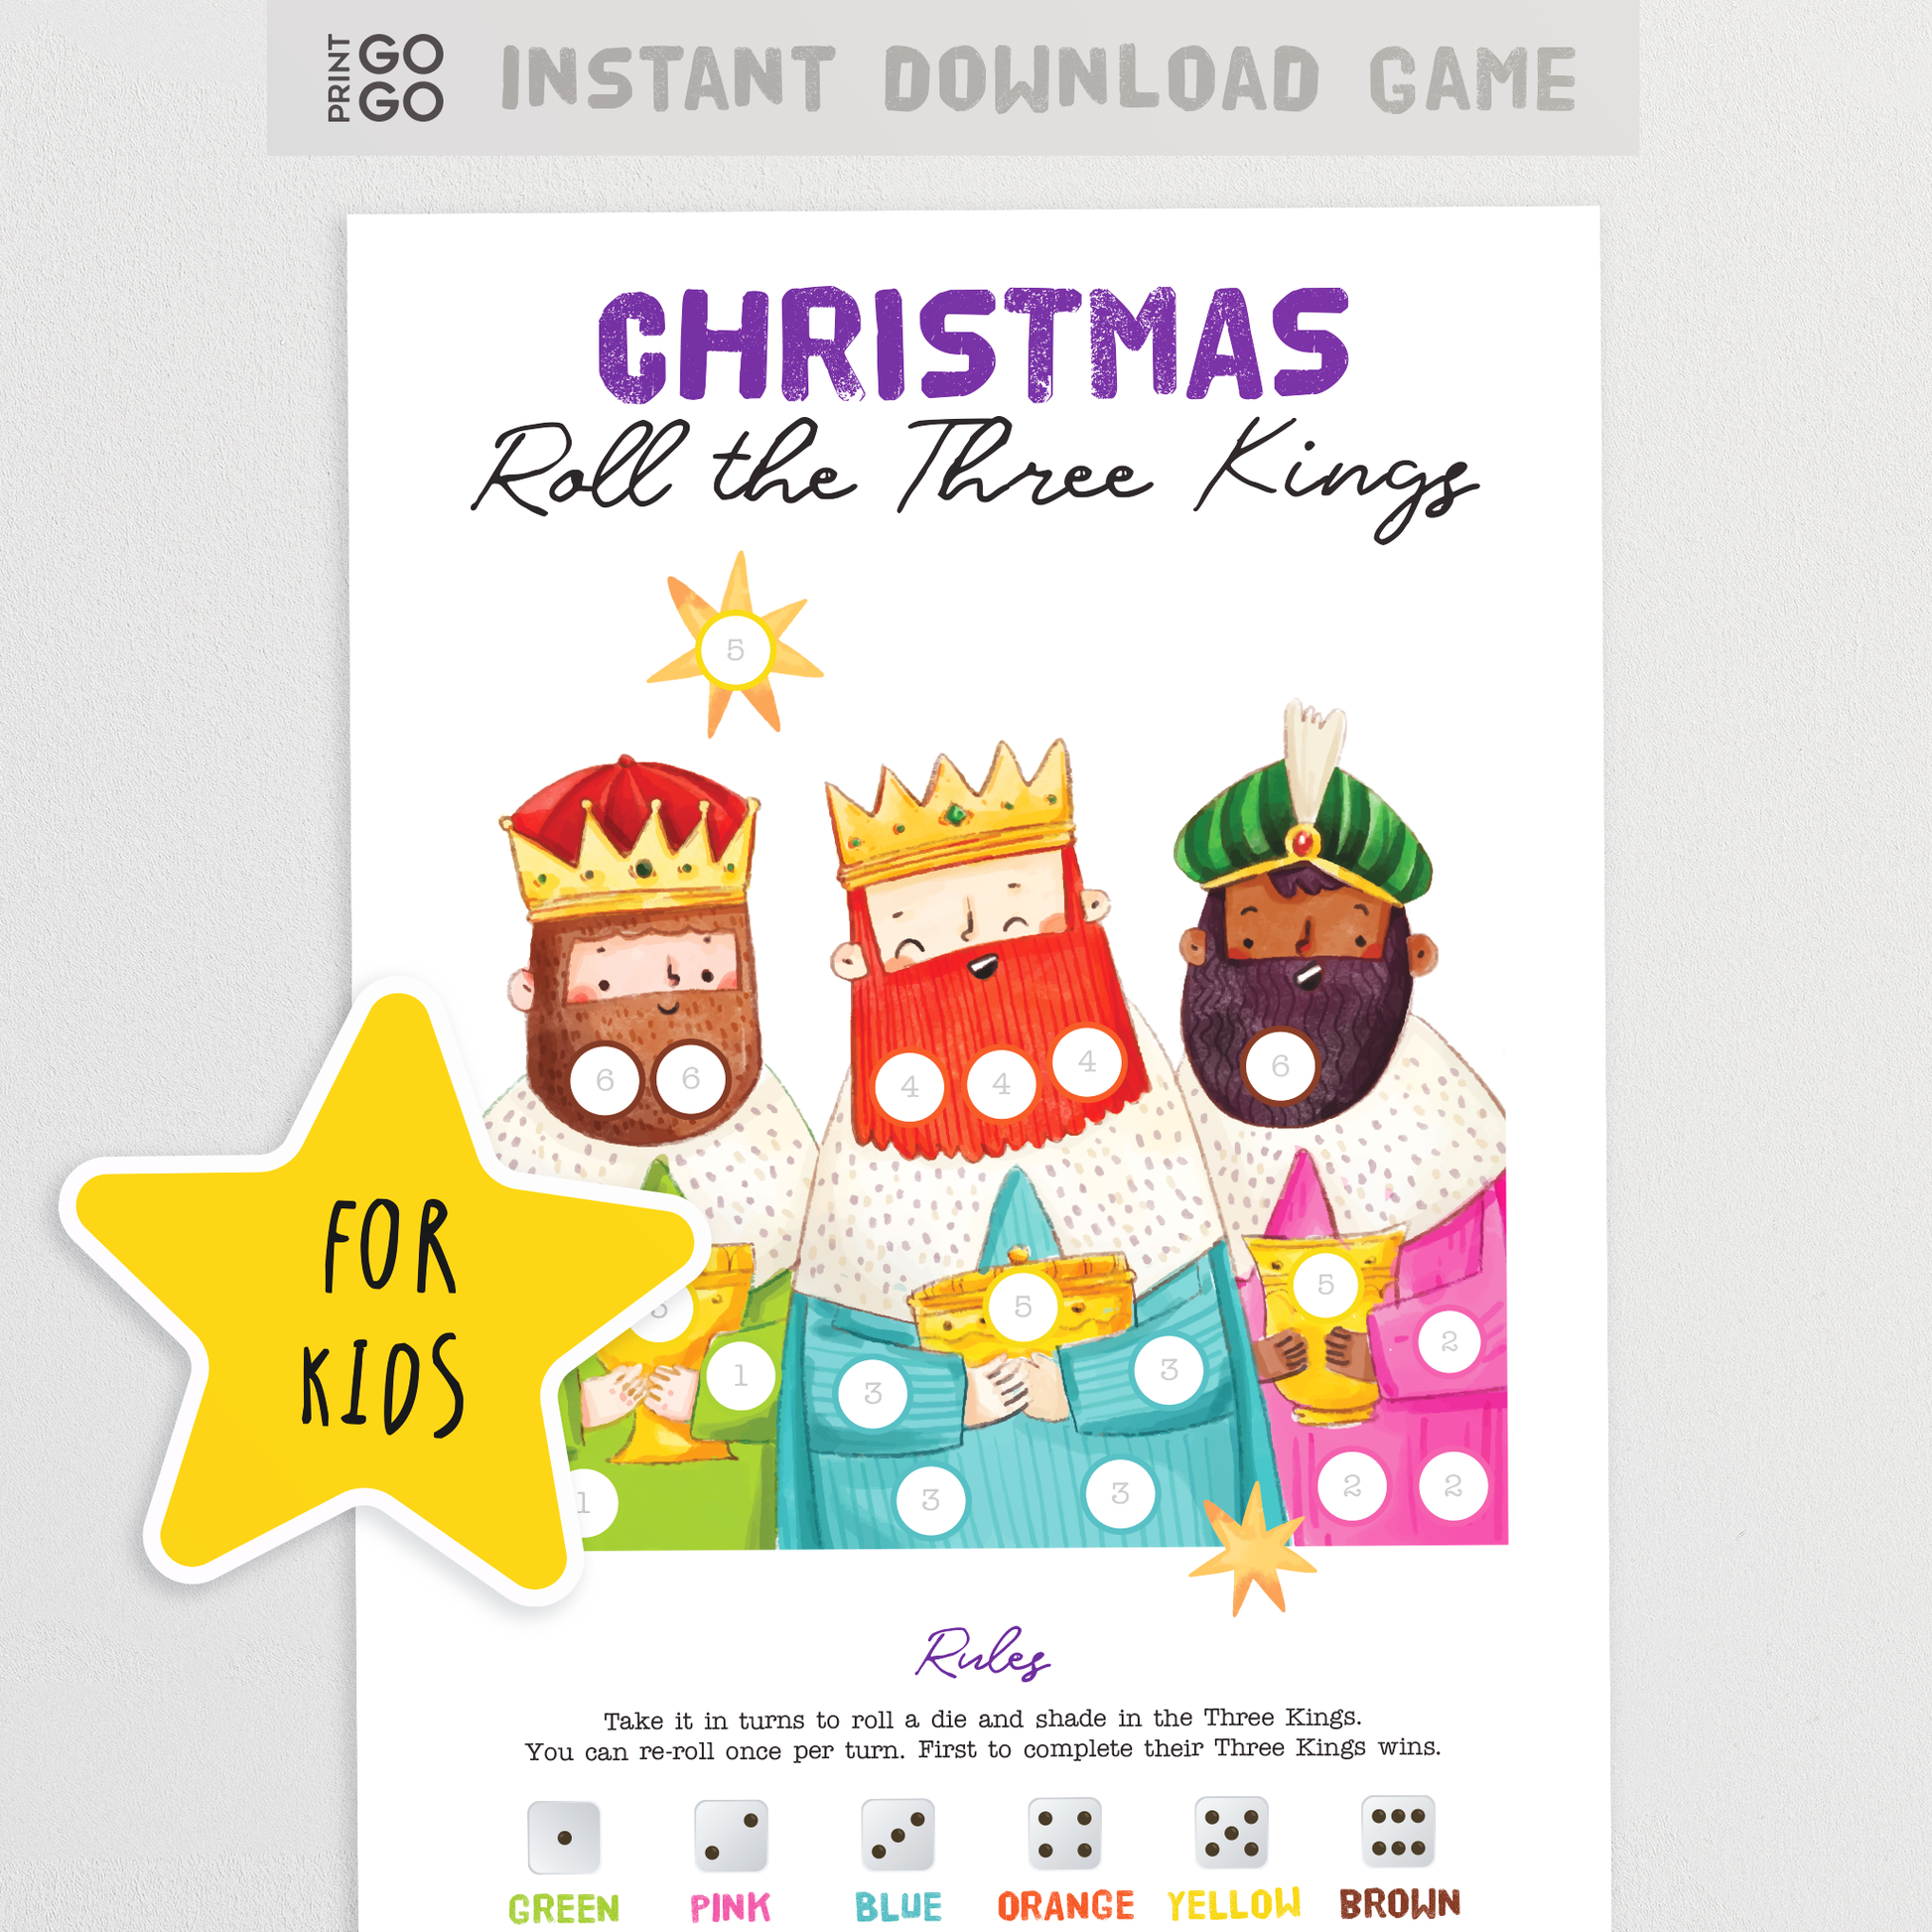 Roll the Three Kings Christmas Dice Game - The Fun Christian Holiday Party Game for Kids | Nativity Dice Game | Printable Church Activity